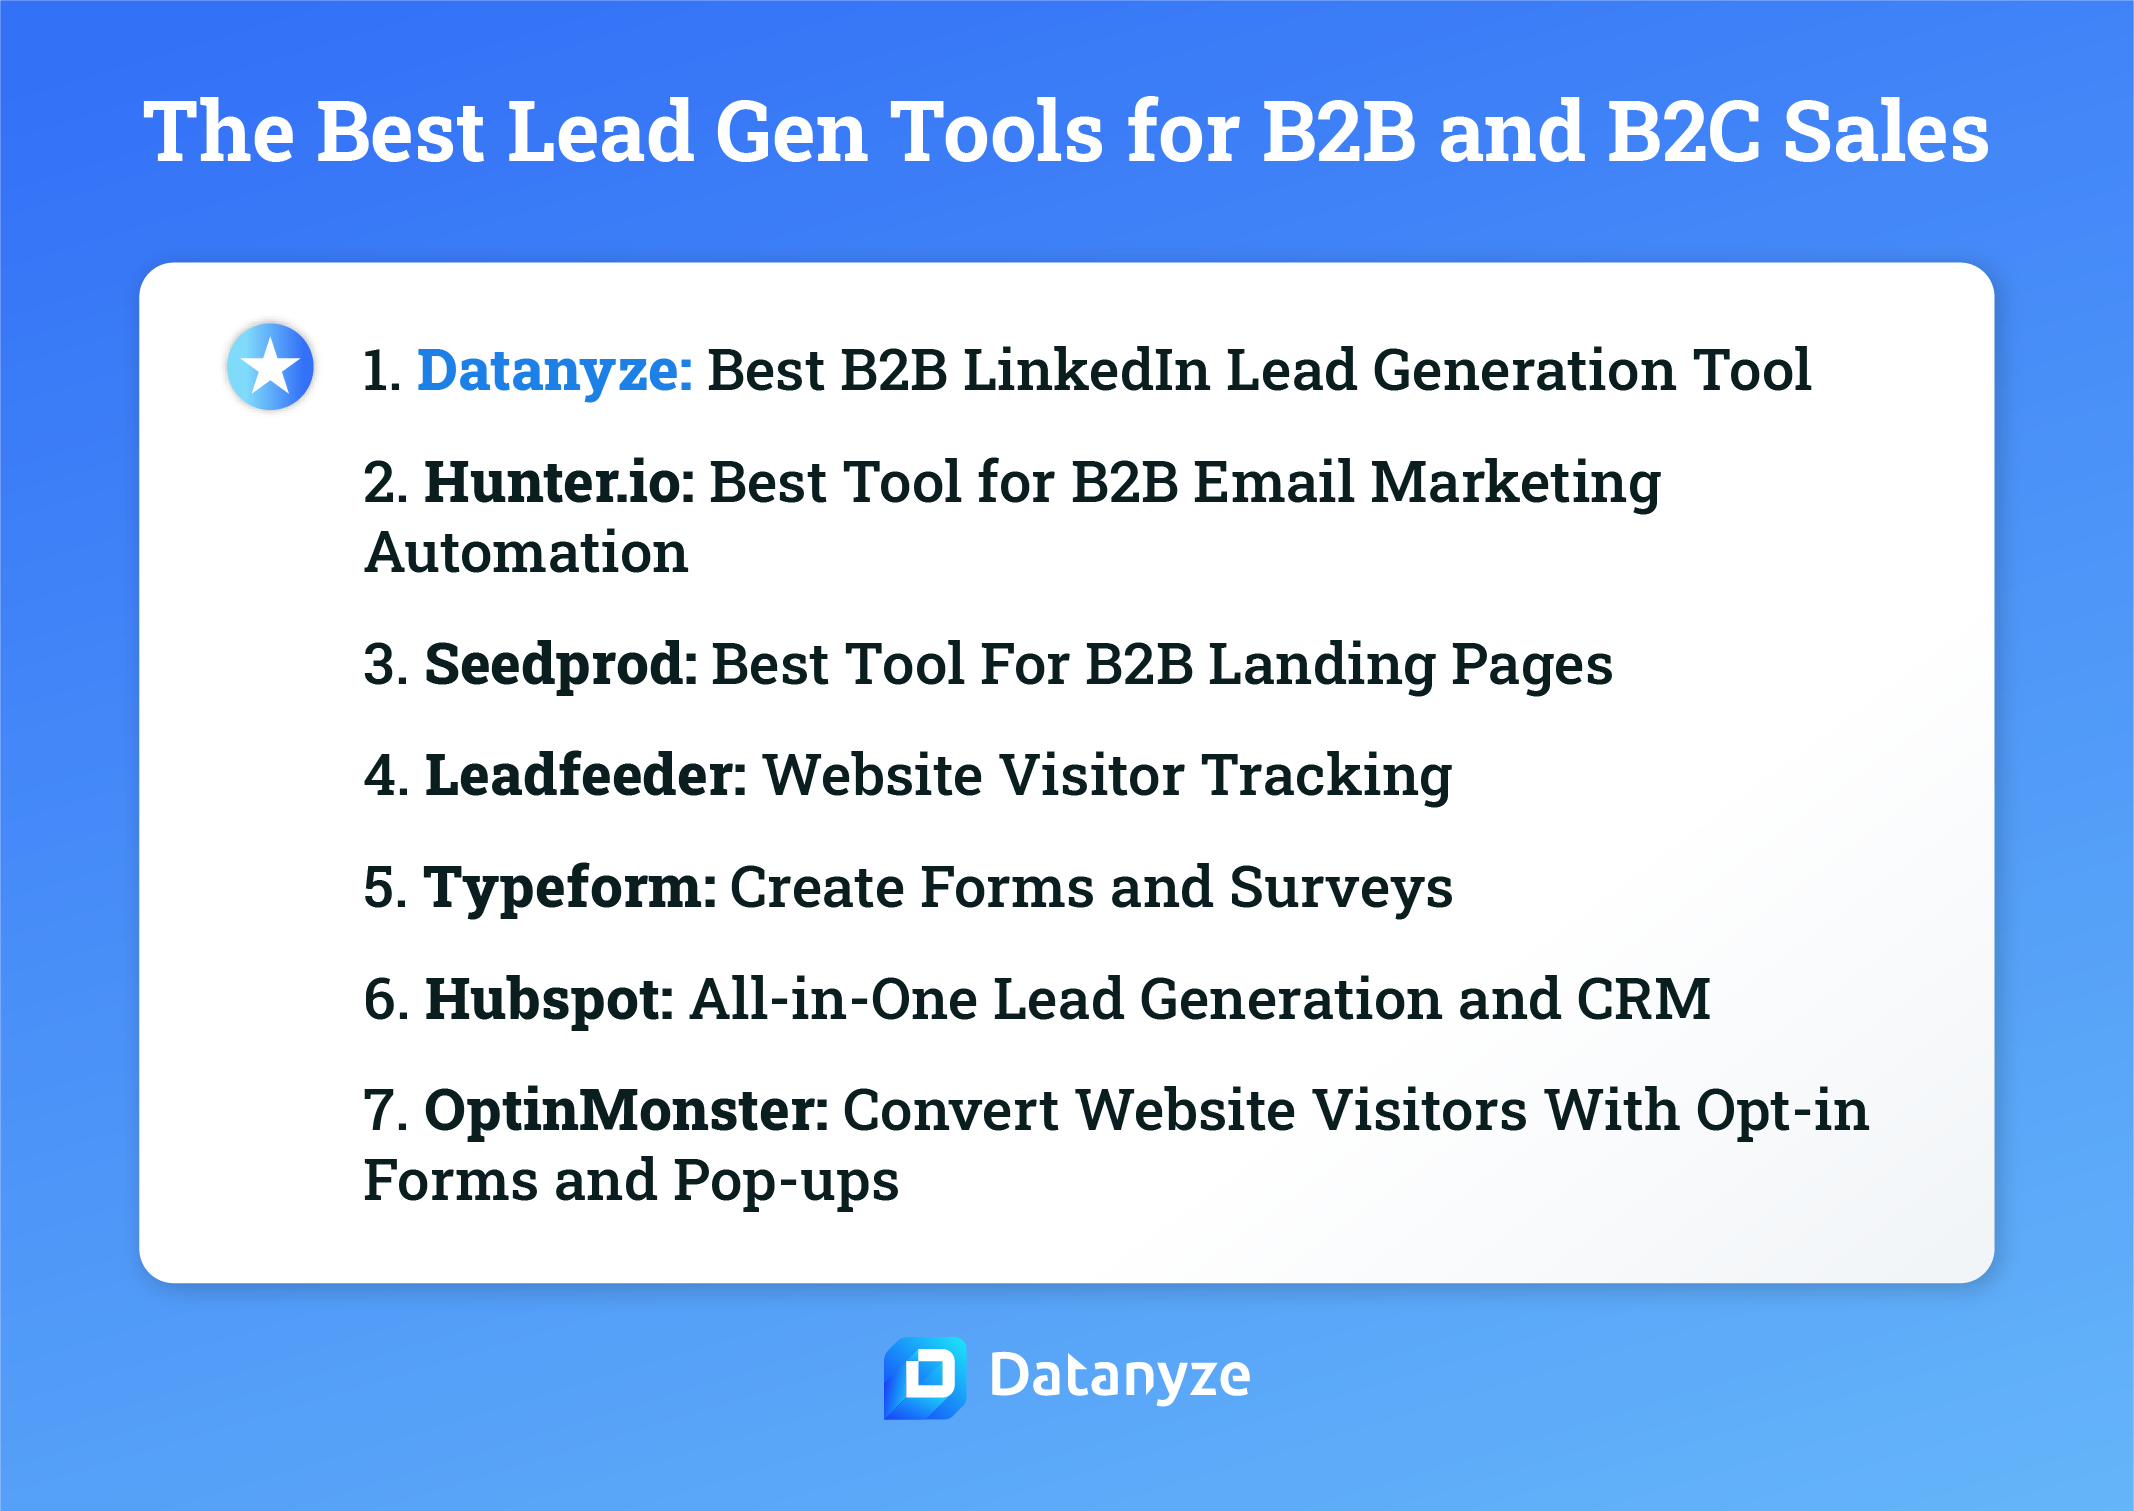 The Best Lead Gen Tools for B2B and B2C Sales